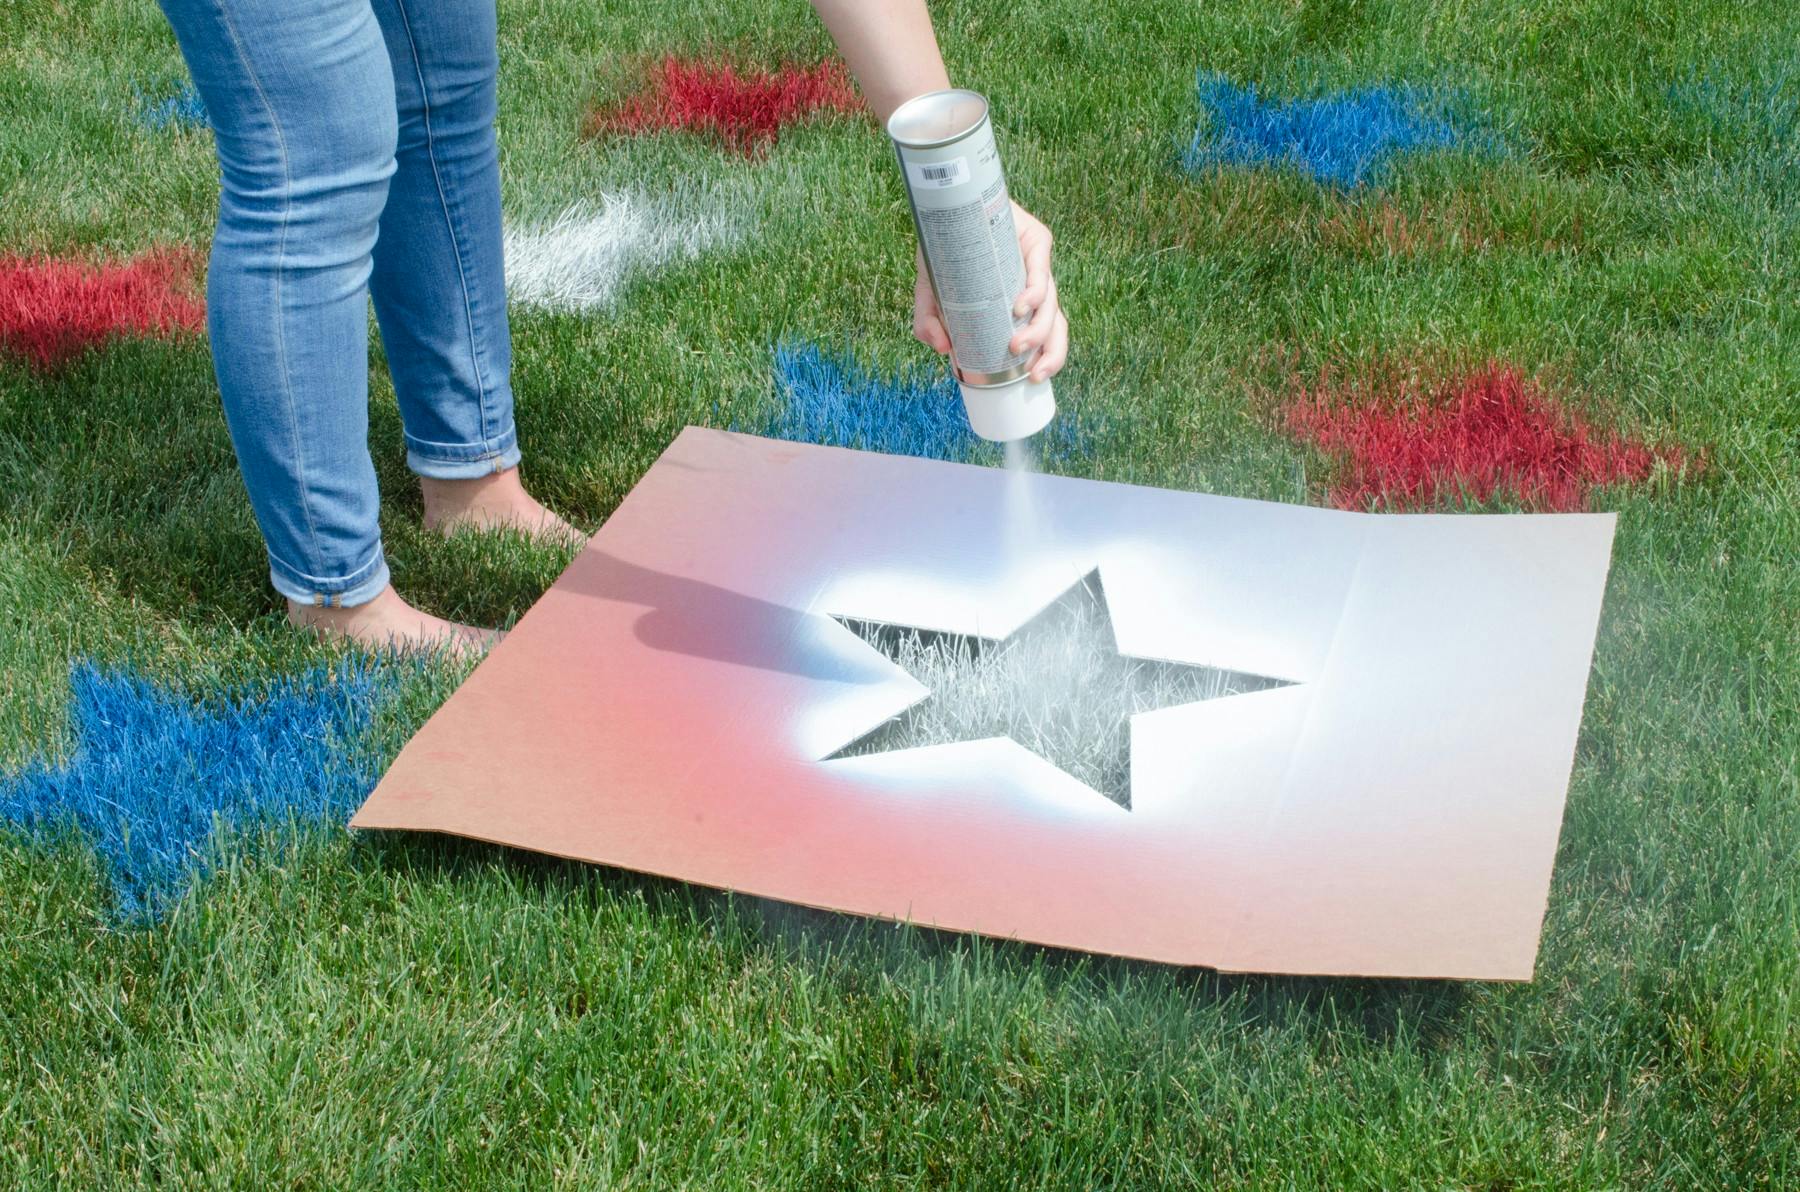 A person using a star-shaped cardboard stencil and marking spray paint to put red, white, and blue stars on a lawn.